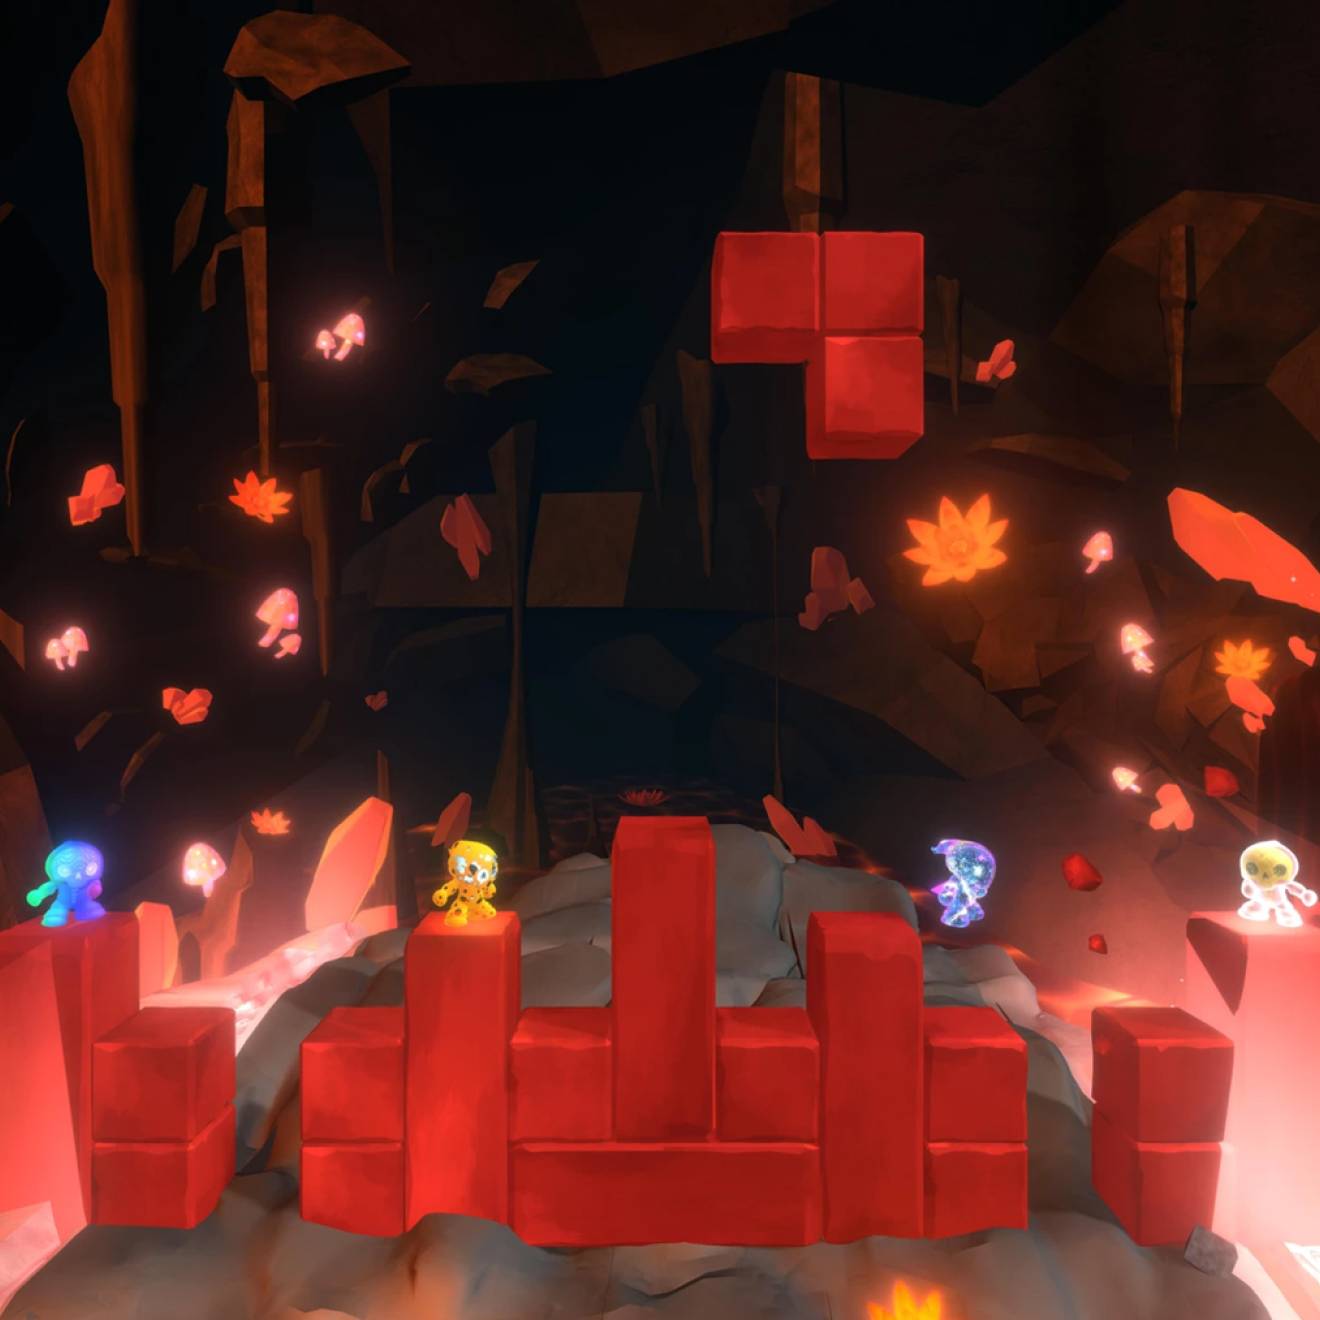 A screenshot of 4 characters in the game Squish